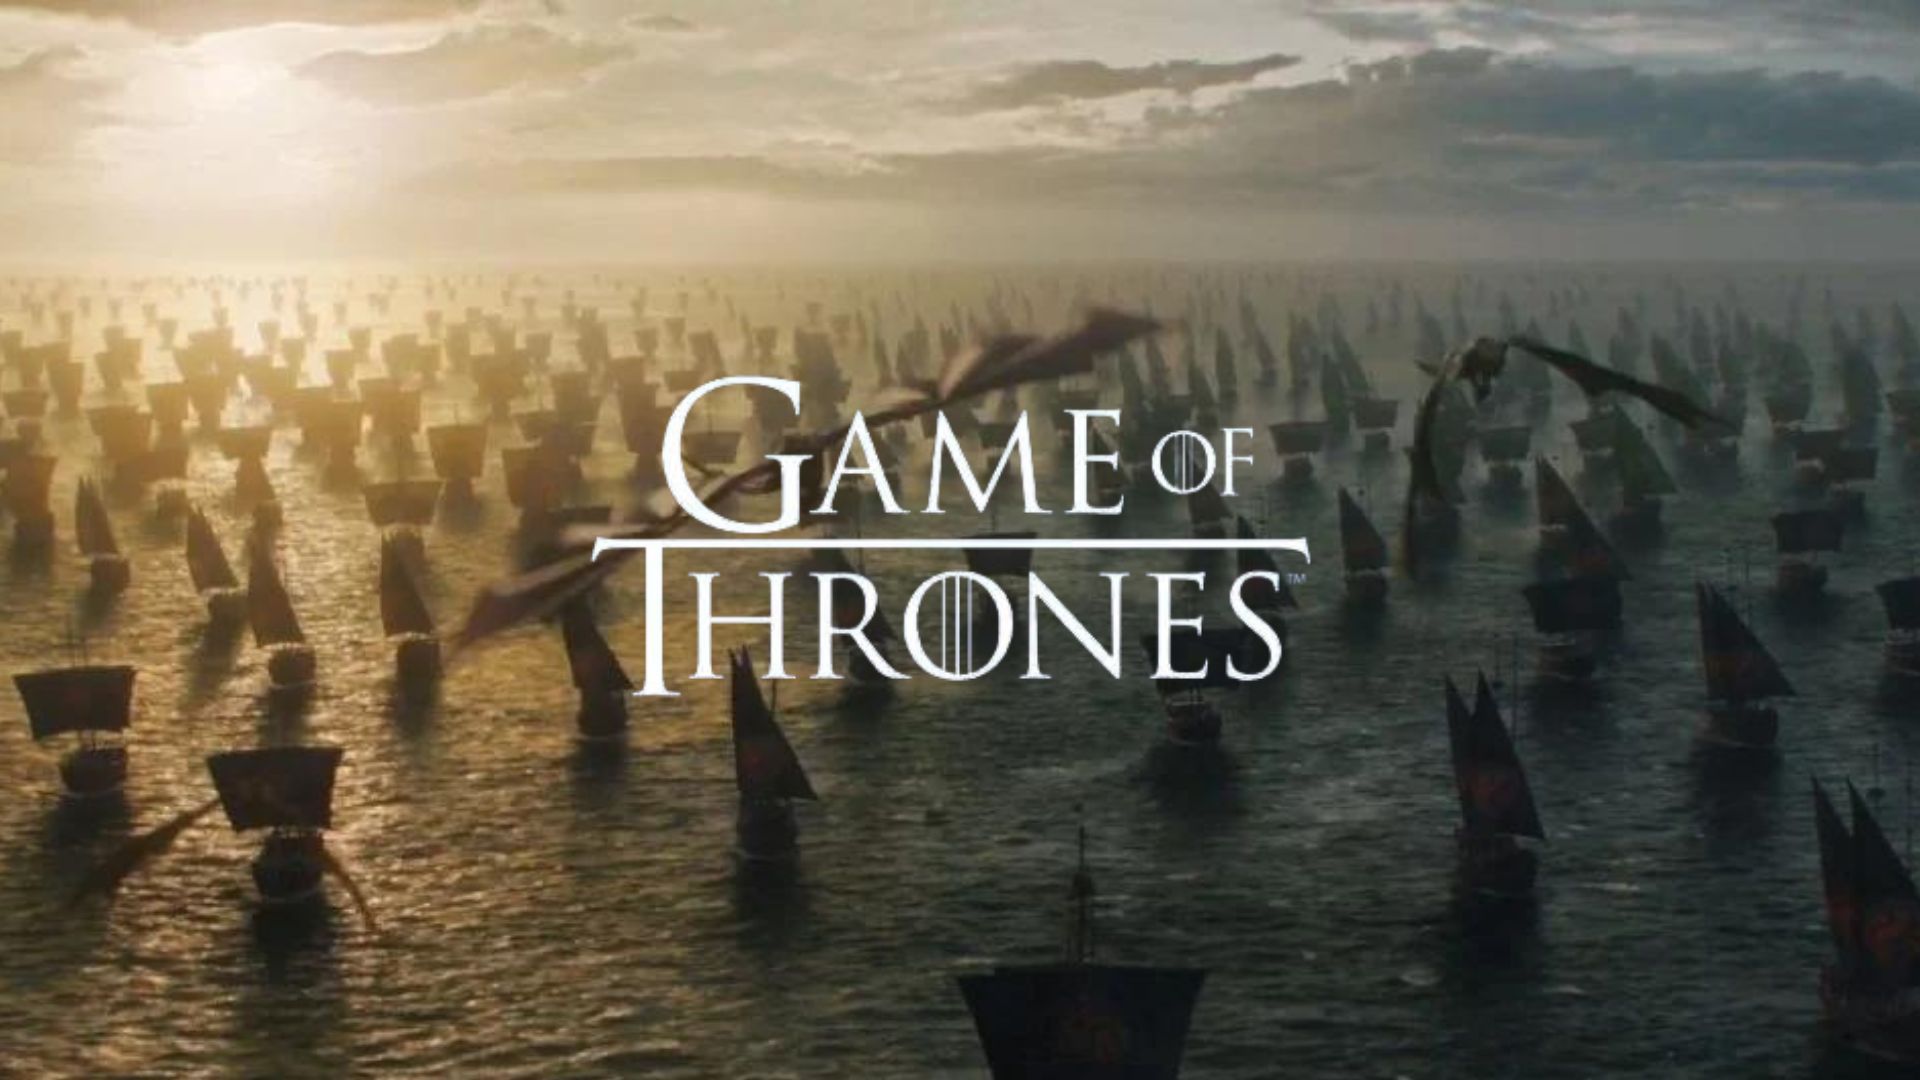 Game of Thrones Spinoff 10,000 Ships’ Brian Helgeland Reveals New Details About the HBO Series